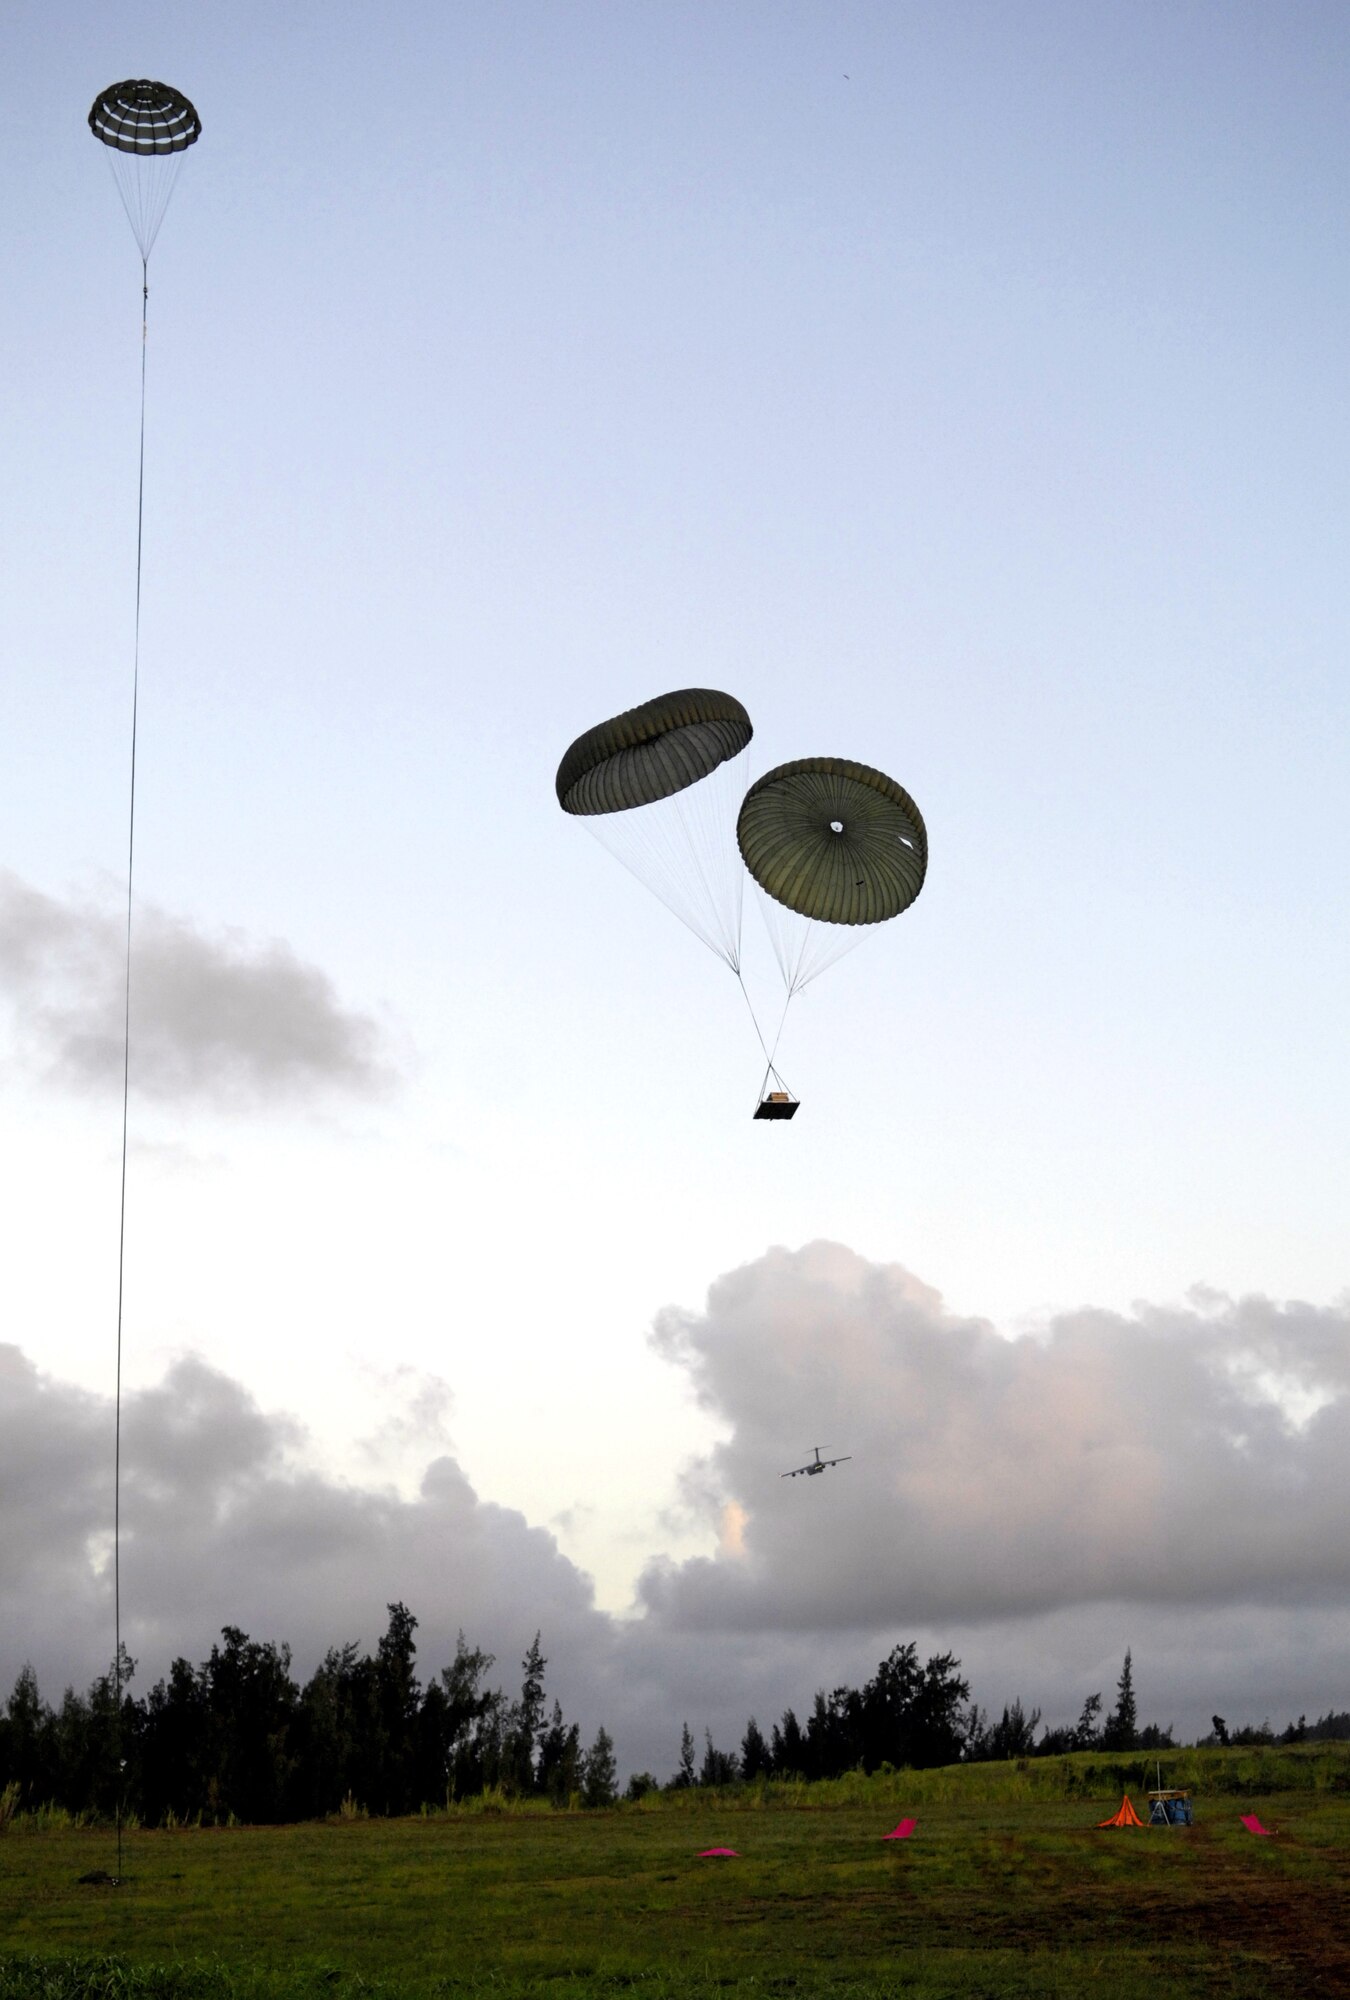 Practice airdrop bundles come in for a landing at the Kahuku Training Range in Hawaii Monday. The C-17’s, from the 535th Airlift Squadron, Hickam Air Force Base, Hawaii are conducting their quarterly airdrop qualifications. (U.S. Air Force photo/ Tech. Sgt. Shane A. Cuomo)